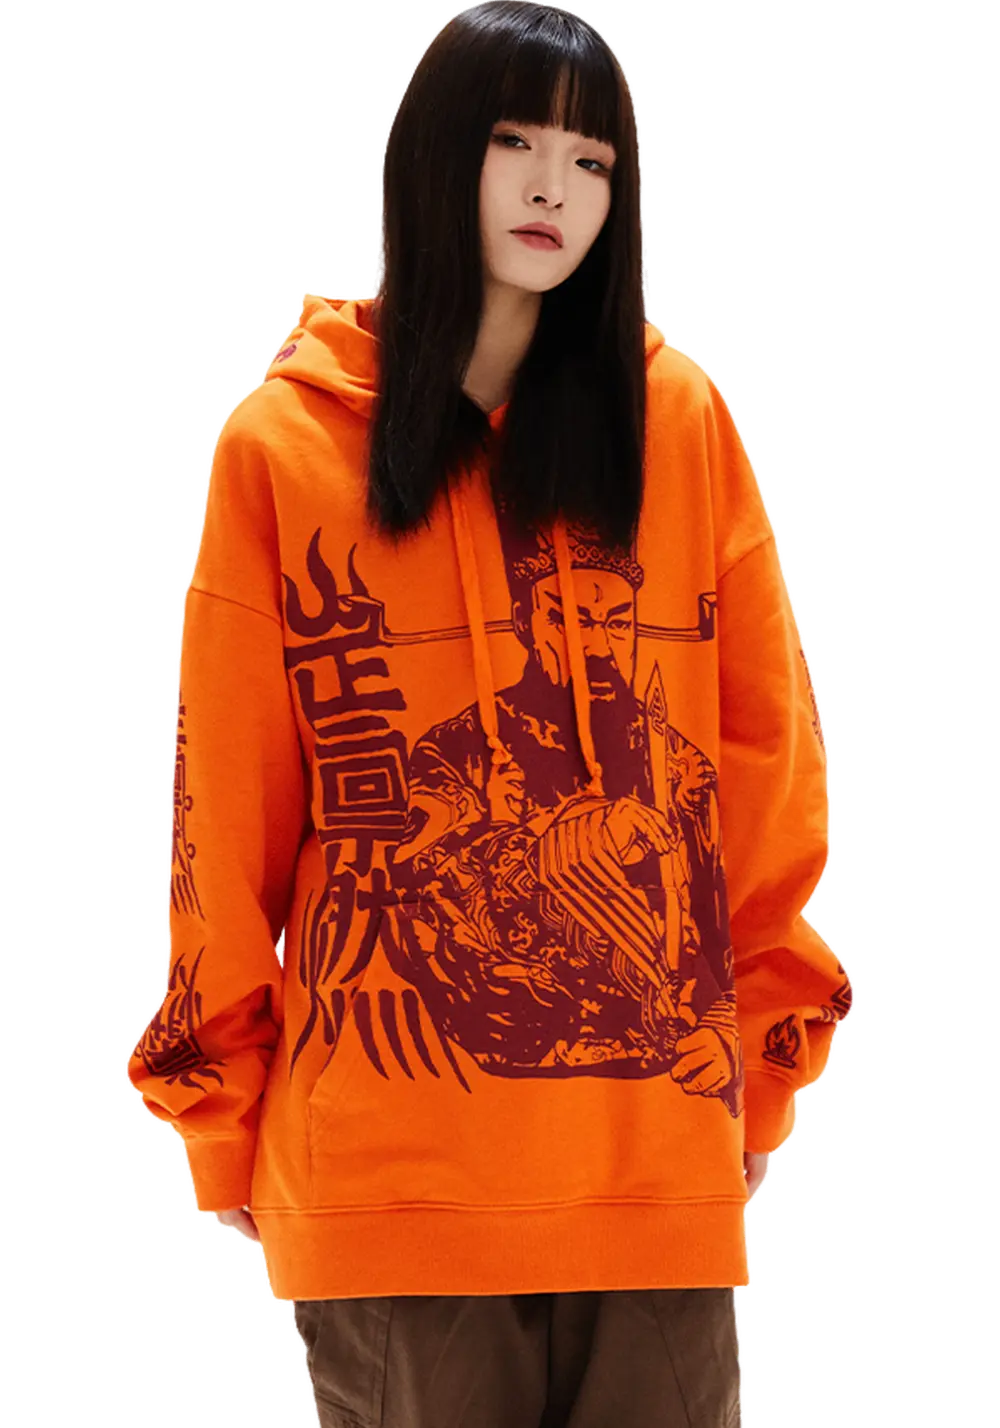 Flame Embroidered Logo Hoodie - PSYLOS 1, Flame Embroidered Logo Hoodie, Hoodie, Burnin, PSYLOS 1